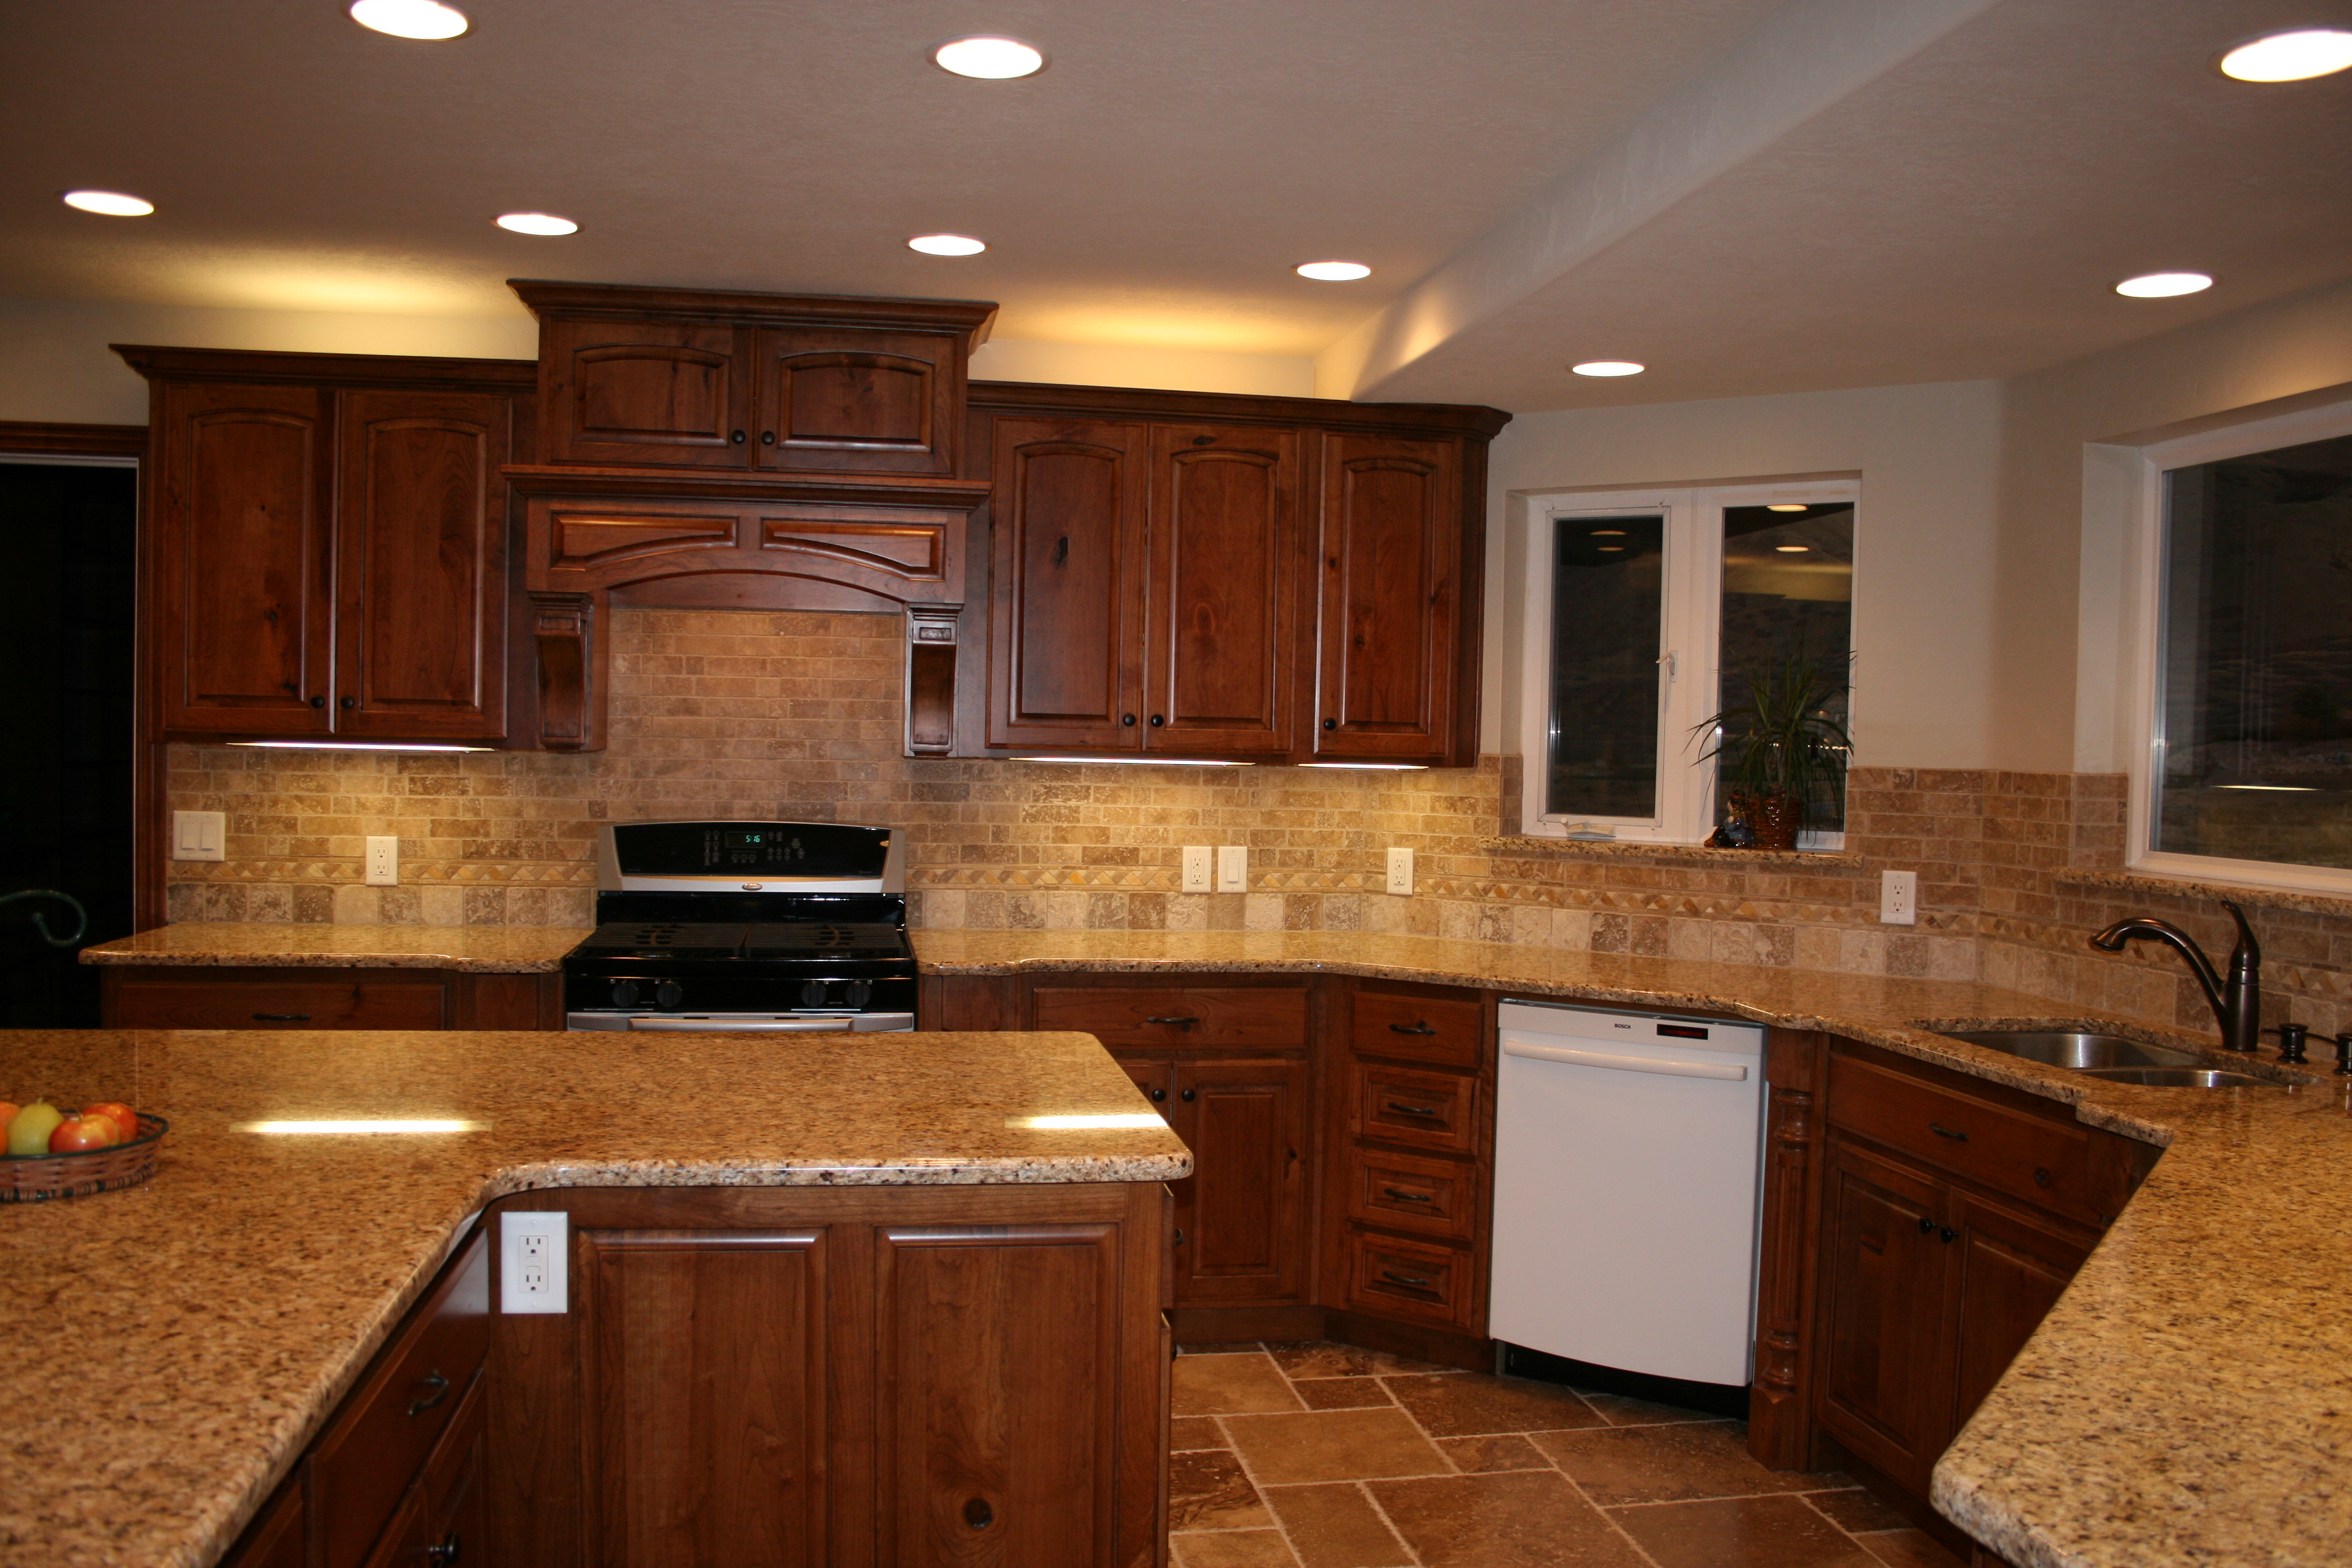 Cherry Cabinets with Granite Countertops and Backsplash